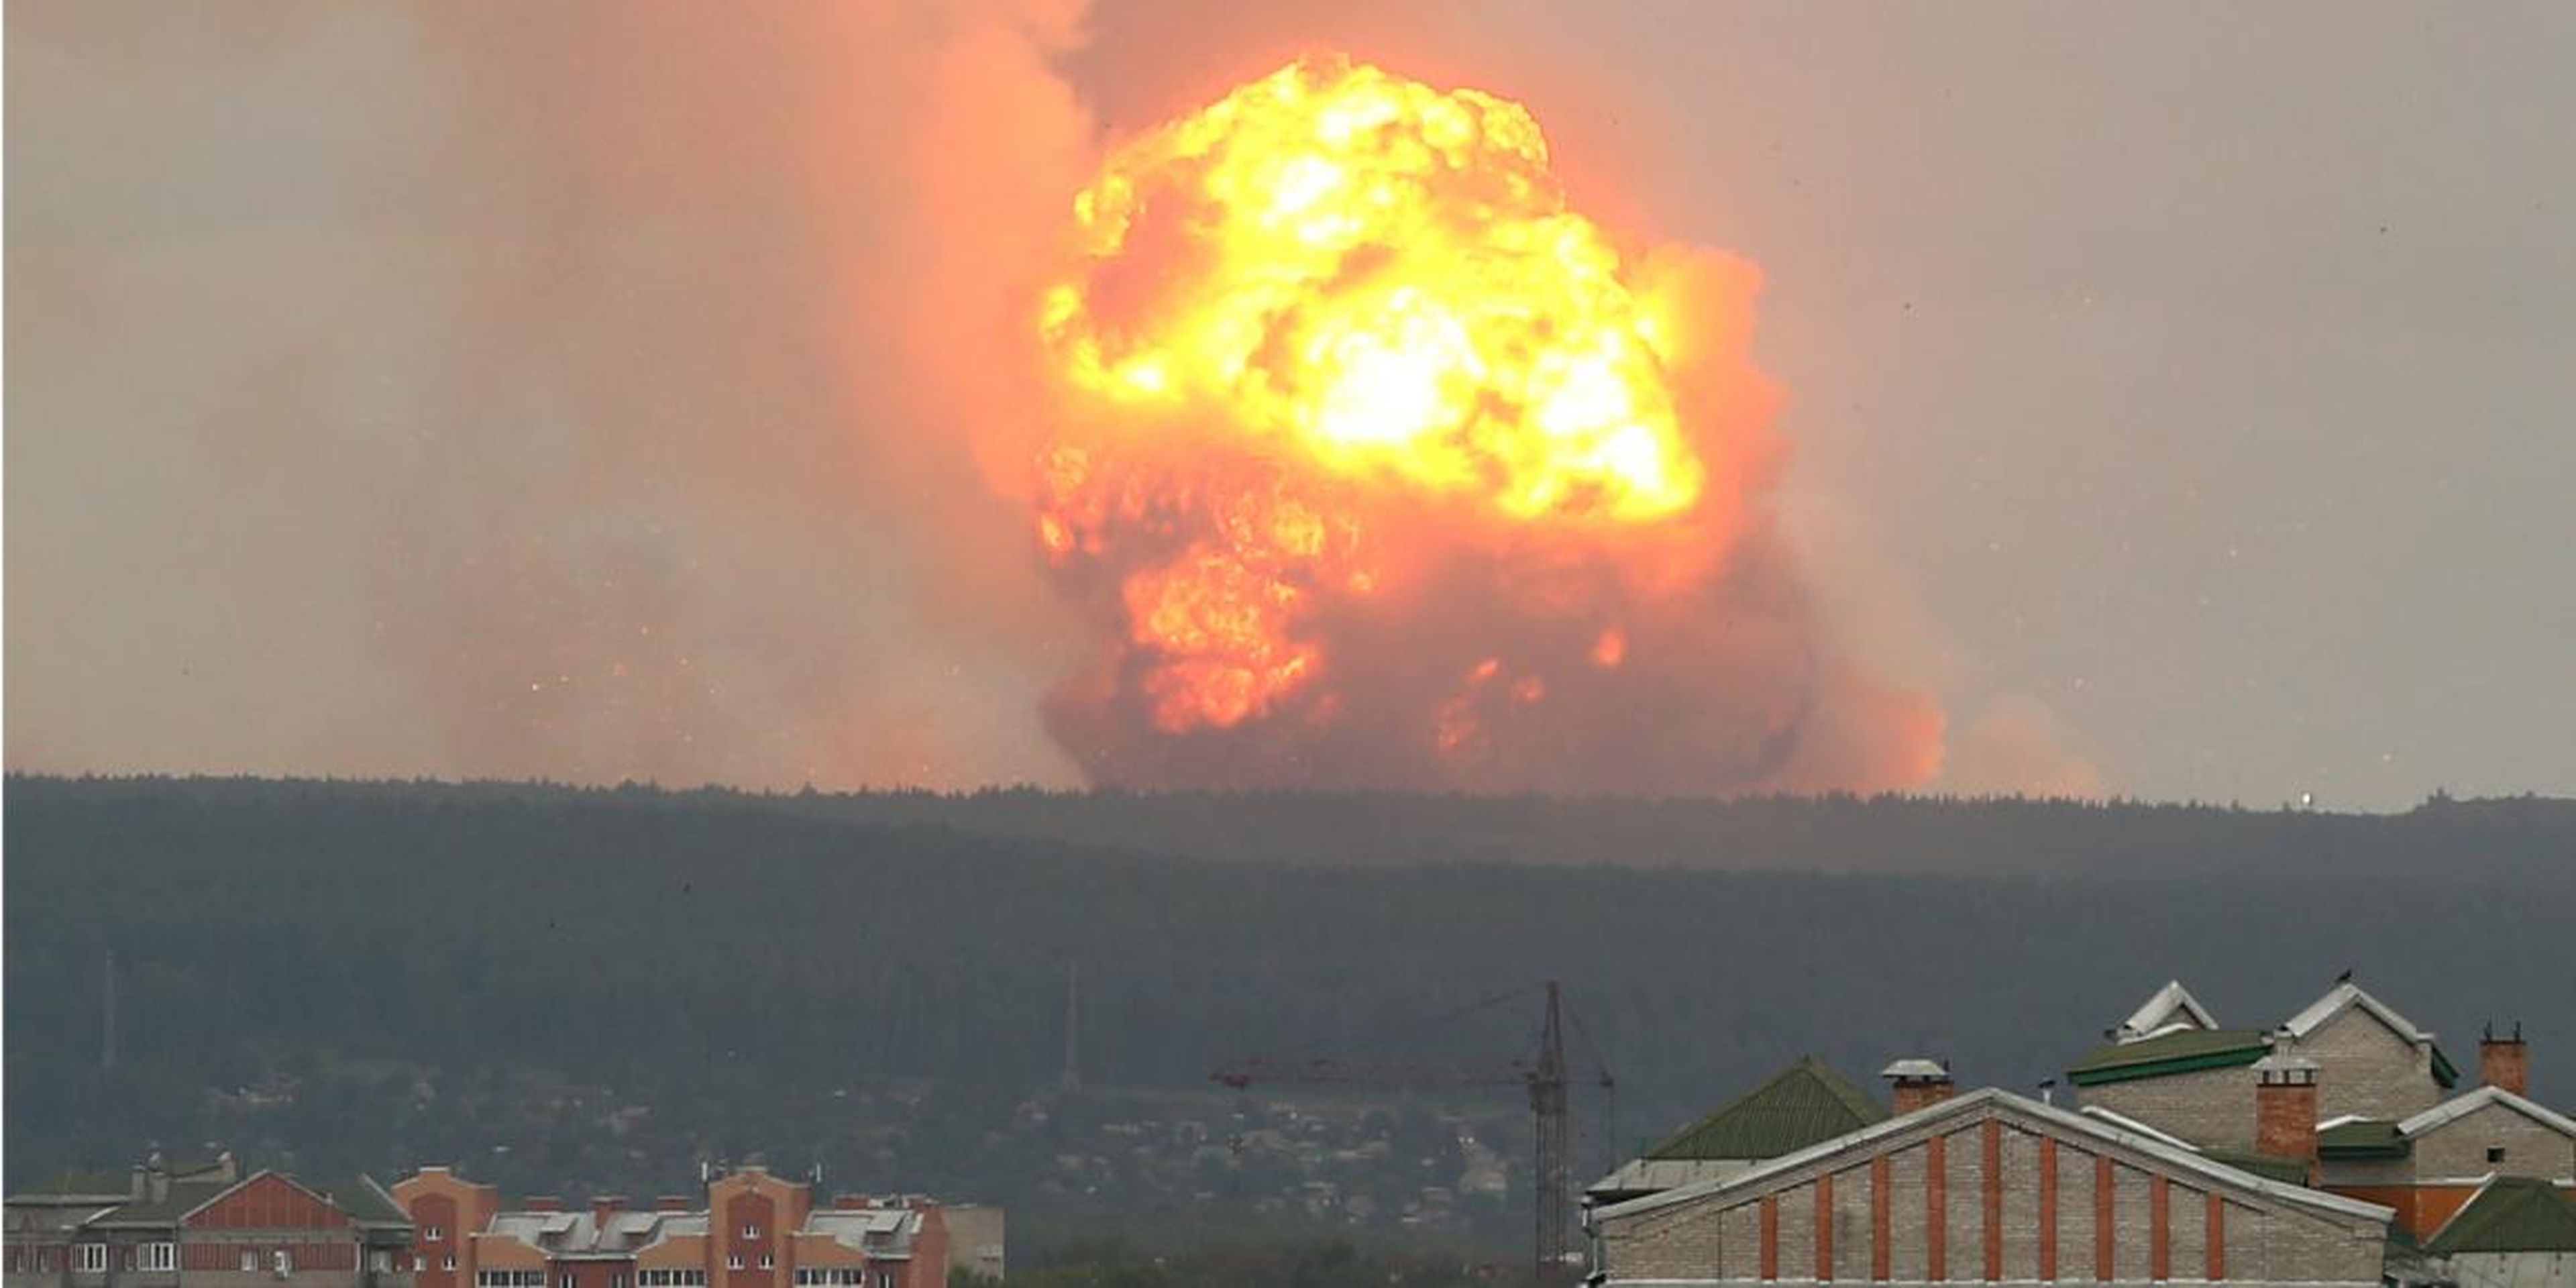 A still from a video showing an explosion at an ammunition depot in the region of Krasnoyarsk, Russia. In a separate incident, a missile exploded at the Nyonoksa test site on August 8.